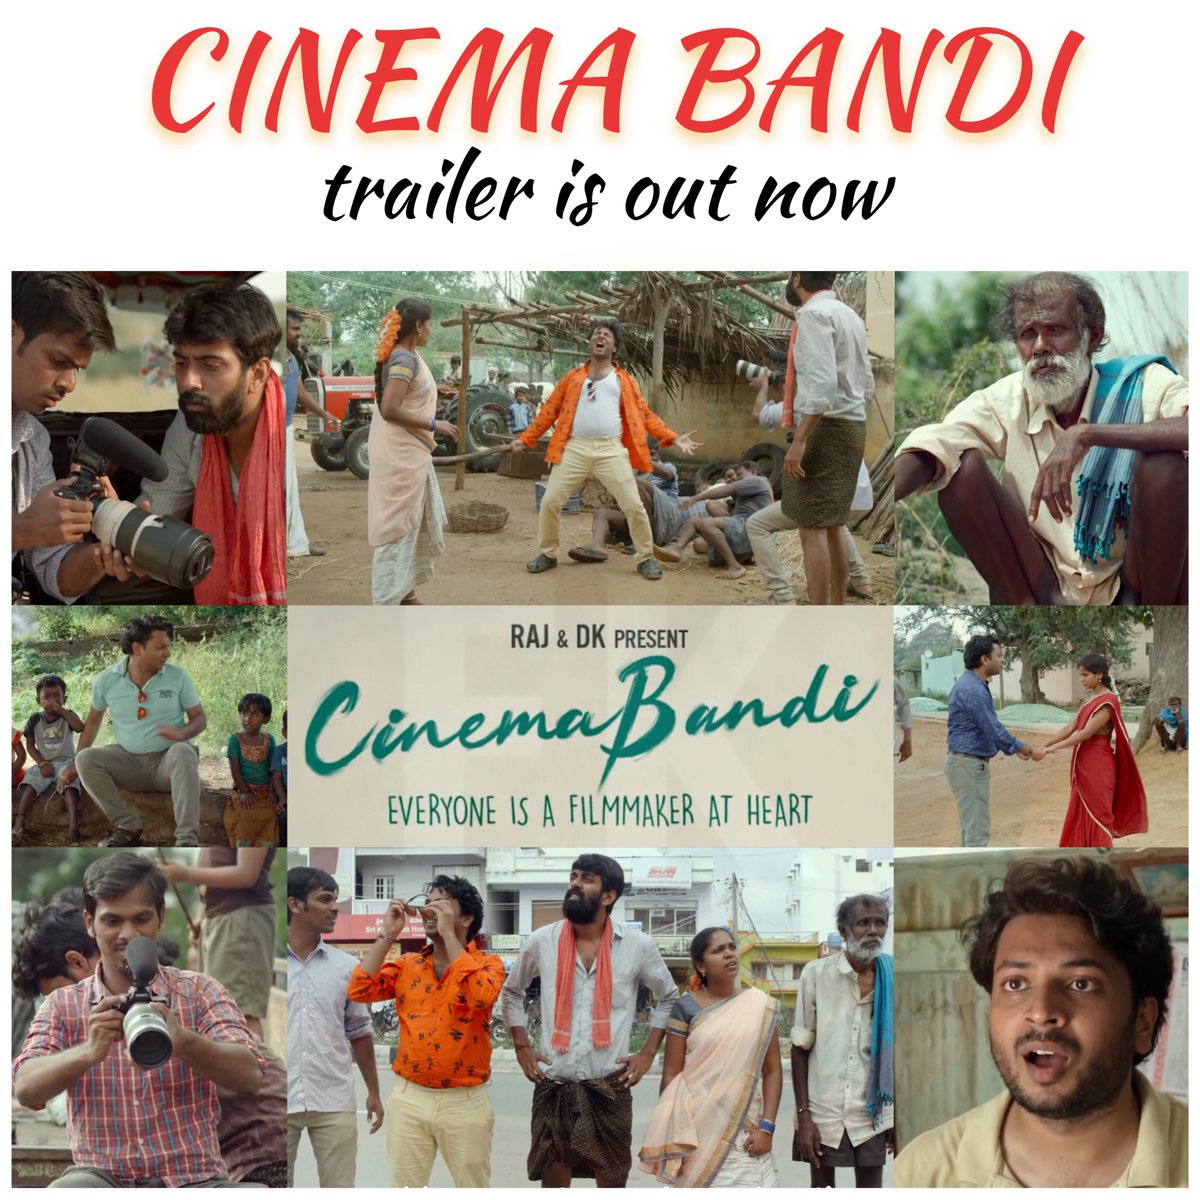 Independent film #CinemaBandi trailer is out now 

A film by #PraveenKandregula 

The film is releasing on #Netflix on May 14, 2021.

👉 youtu.be/vRzgLJMP4zc